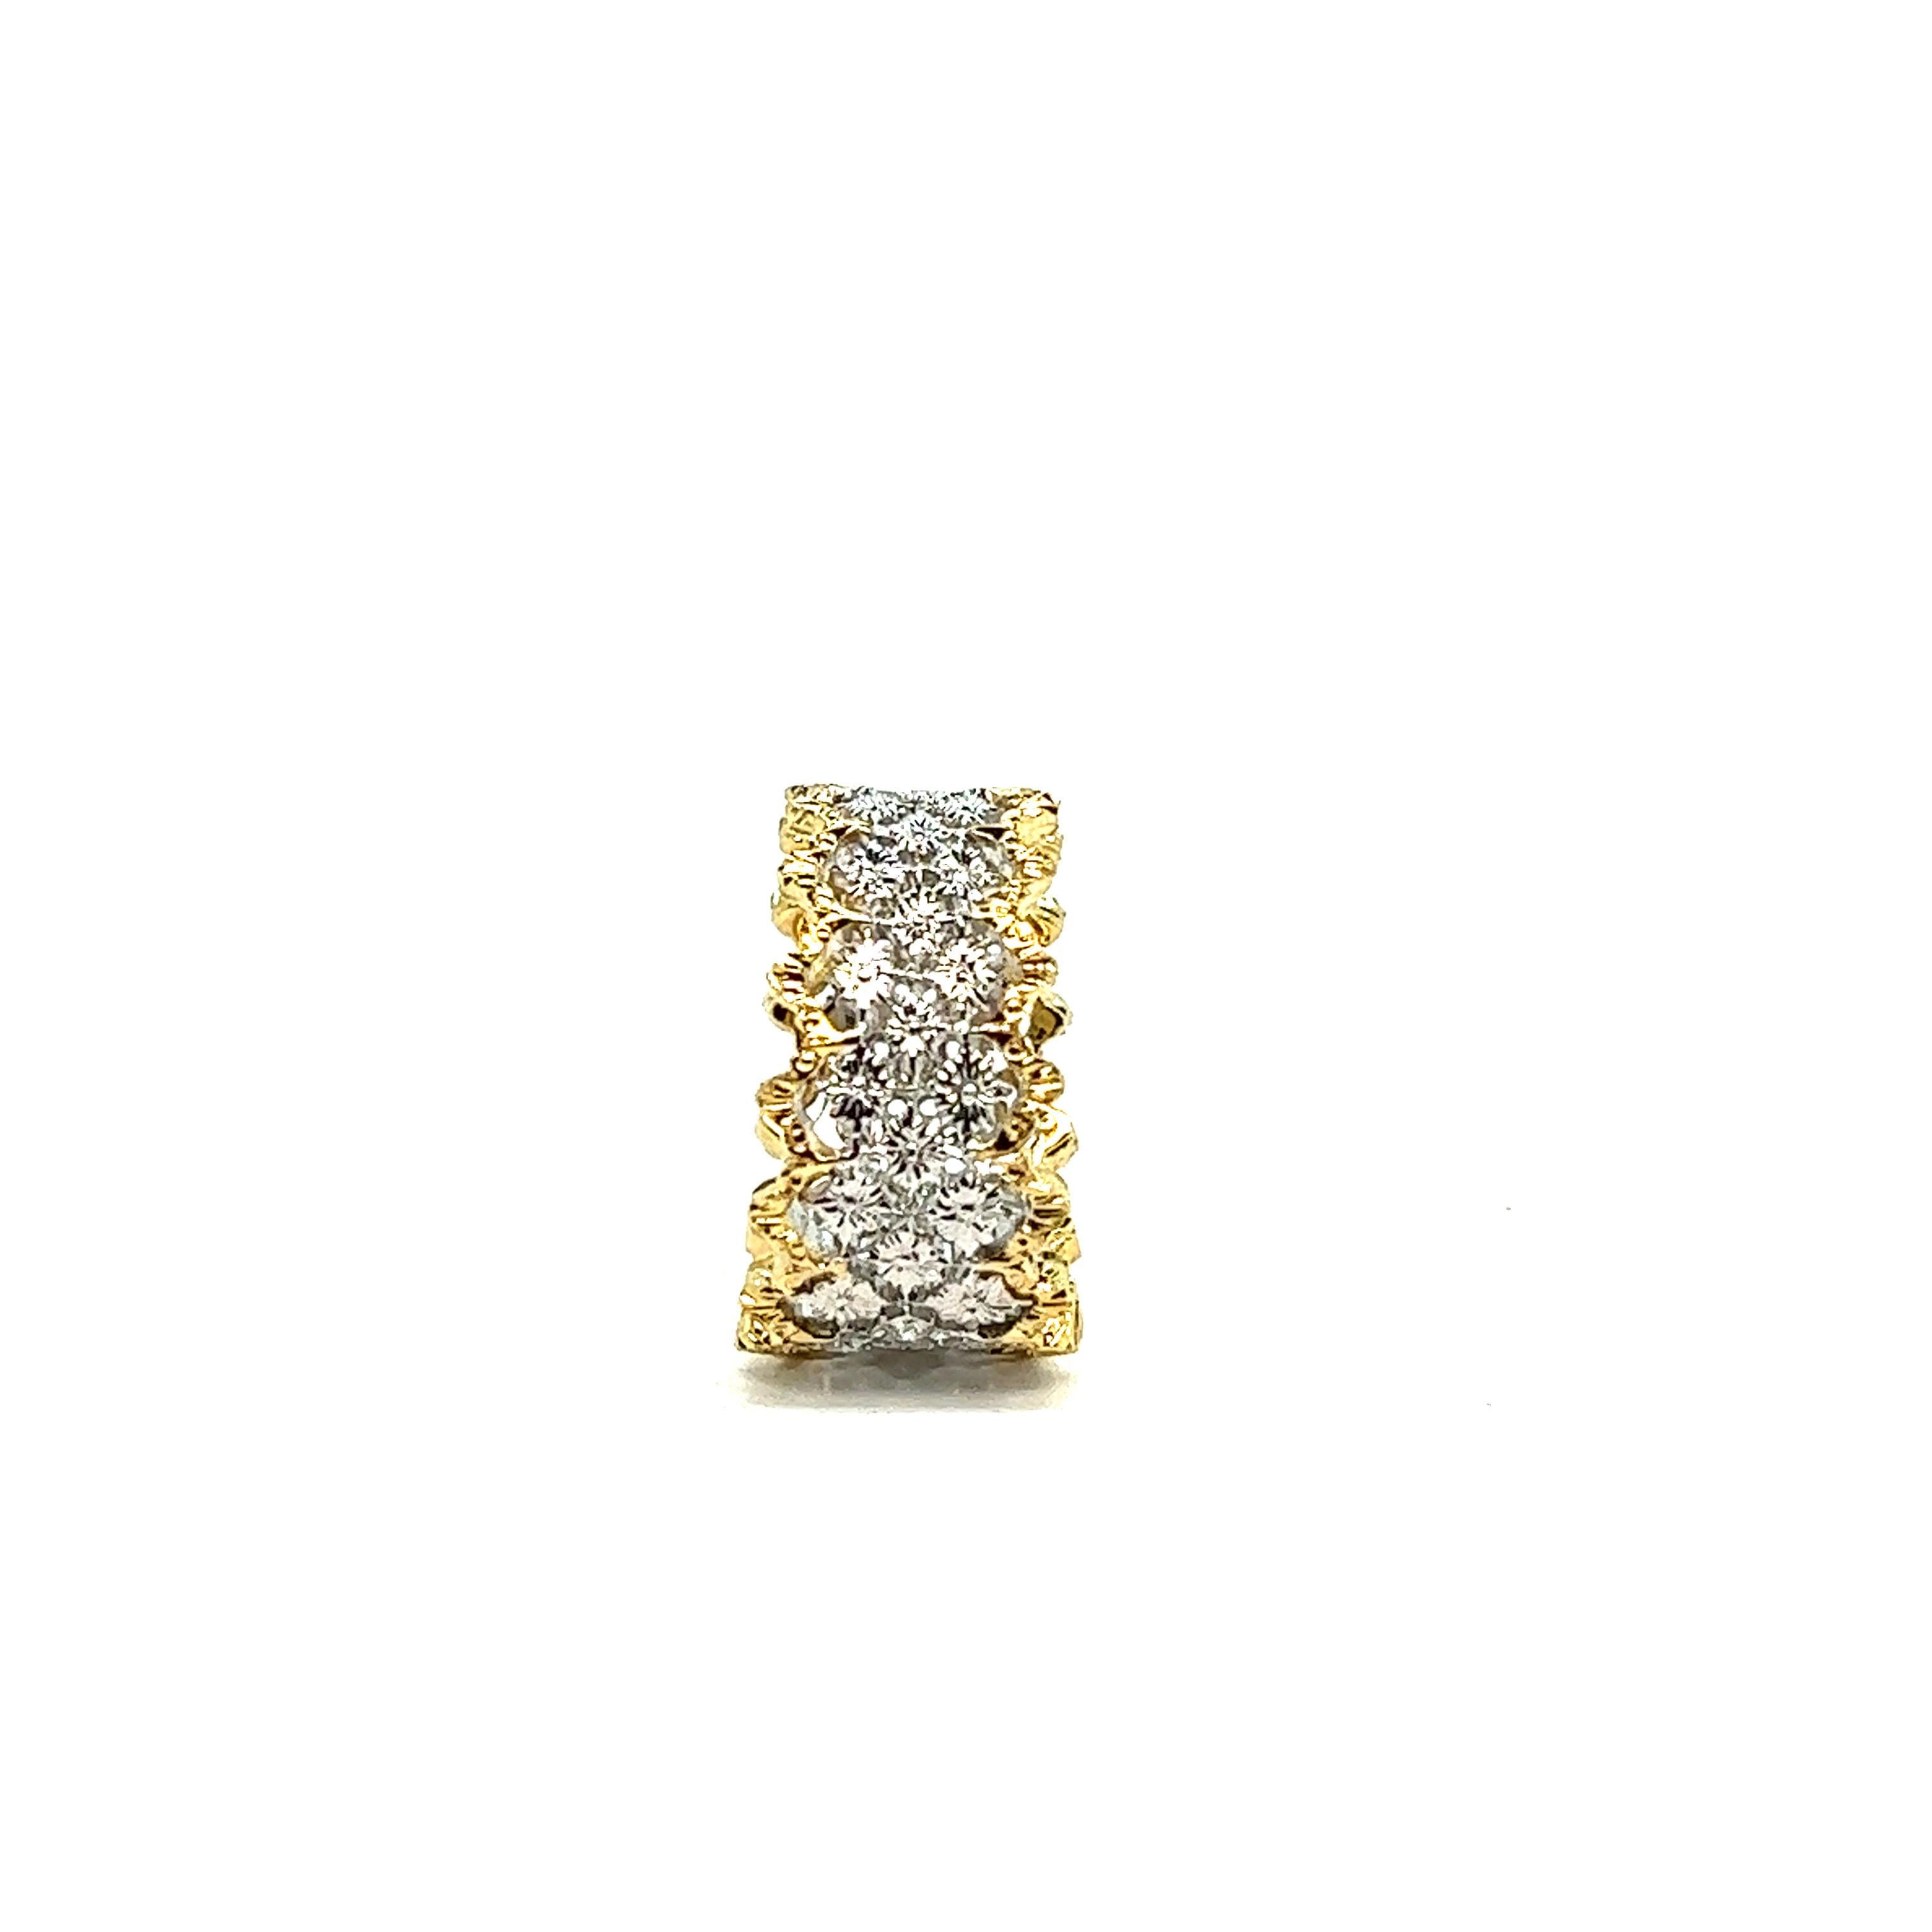 Baroque Lace Ring with 13 Brilliant Cut Diamonds in 18K White and Yellow Gold

This pretty ring of baroque and bohemian style or renaissance style is particularly chiseled and openworked to present the floral decorations. It is set with 13 diamonds